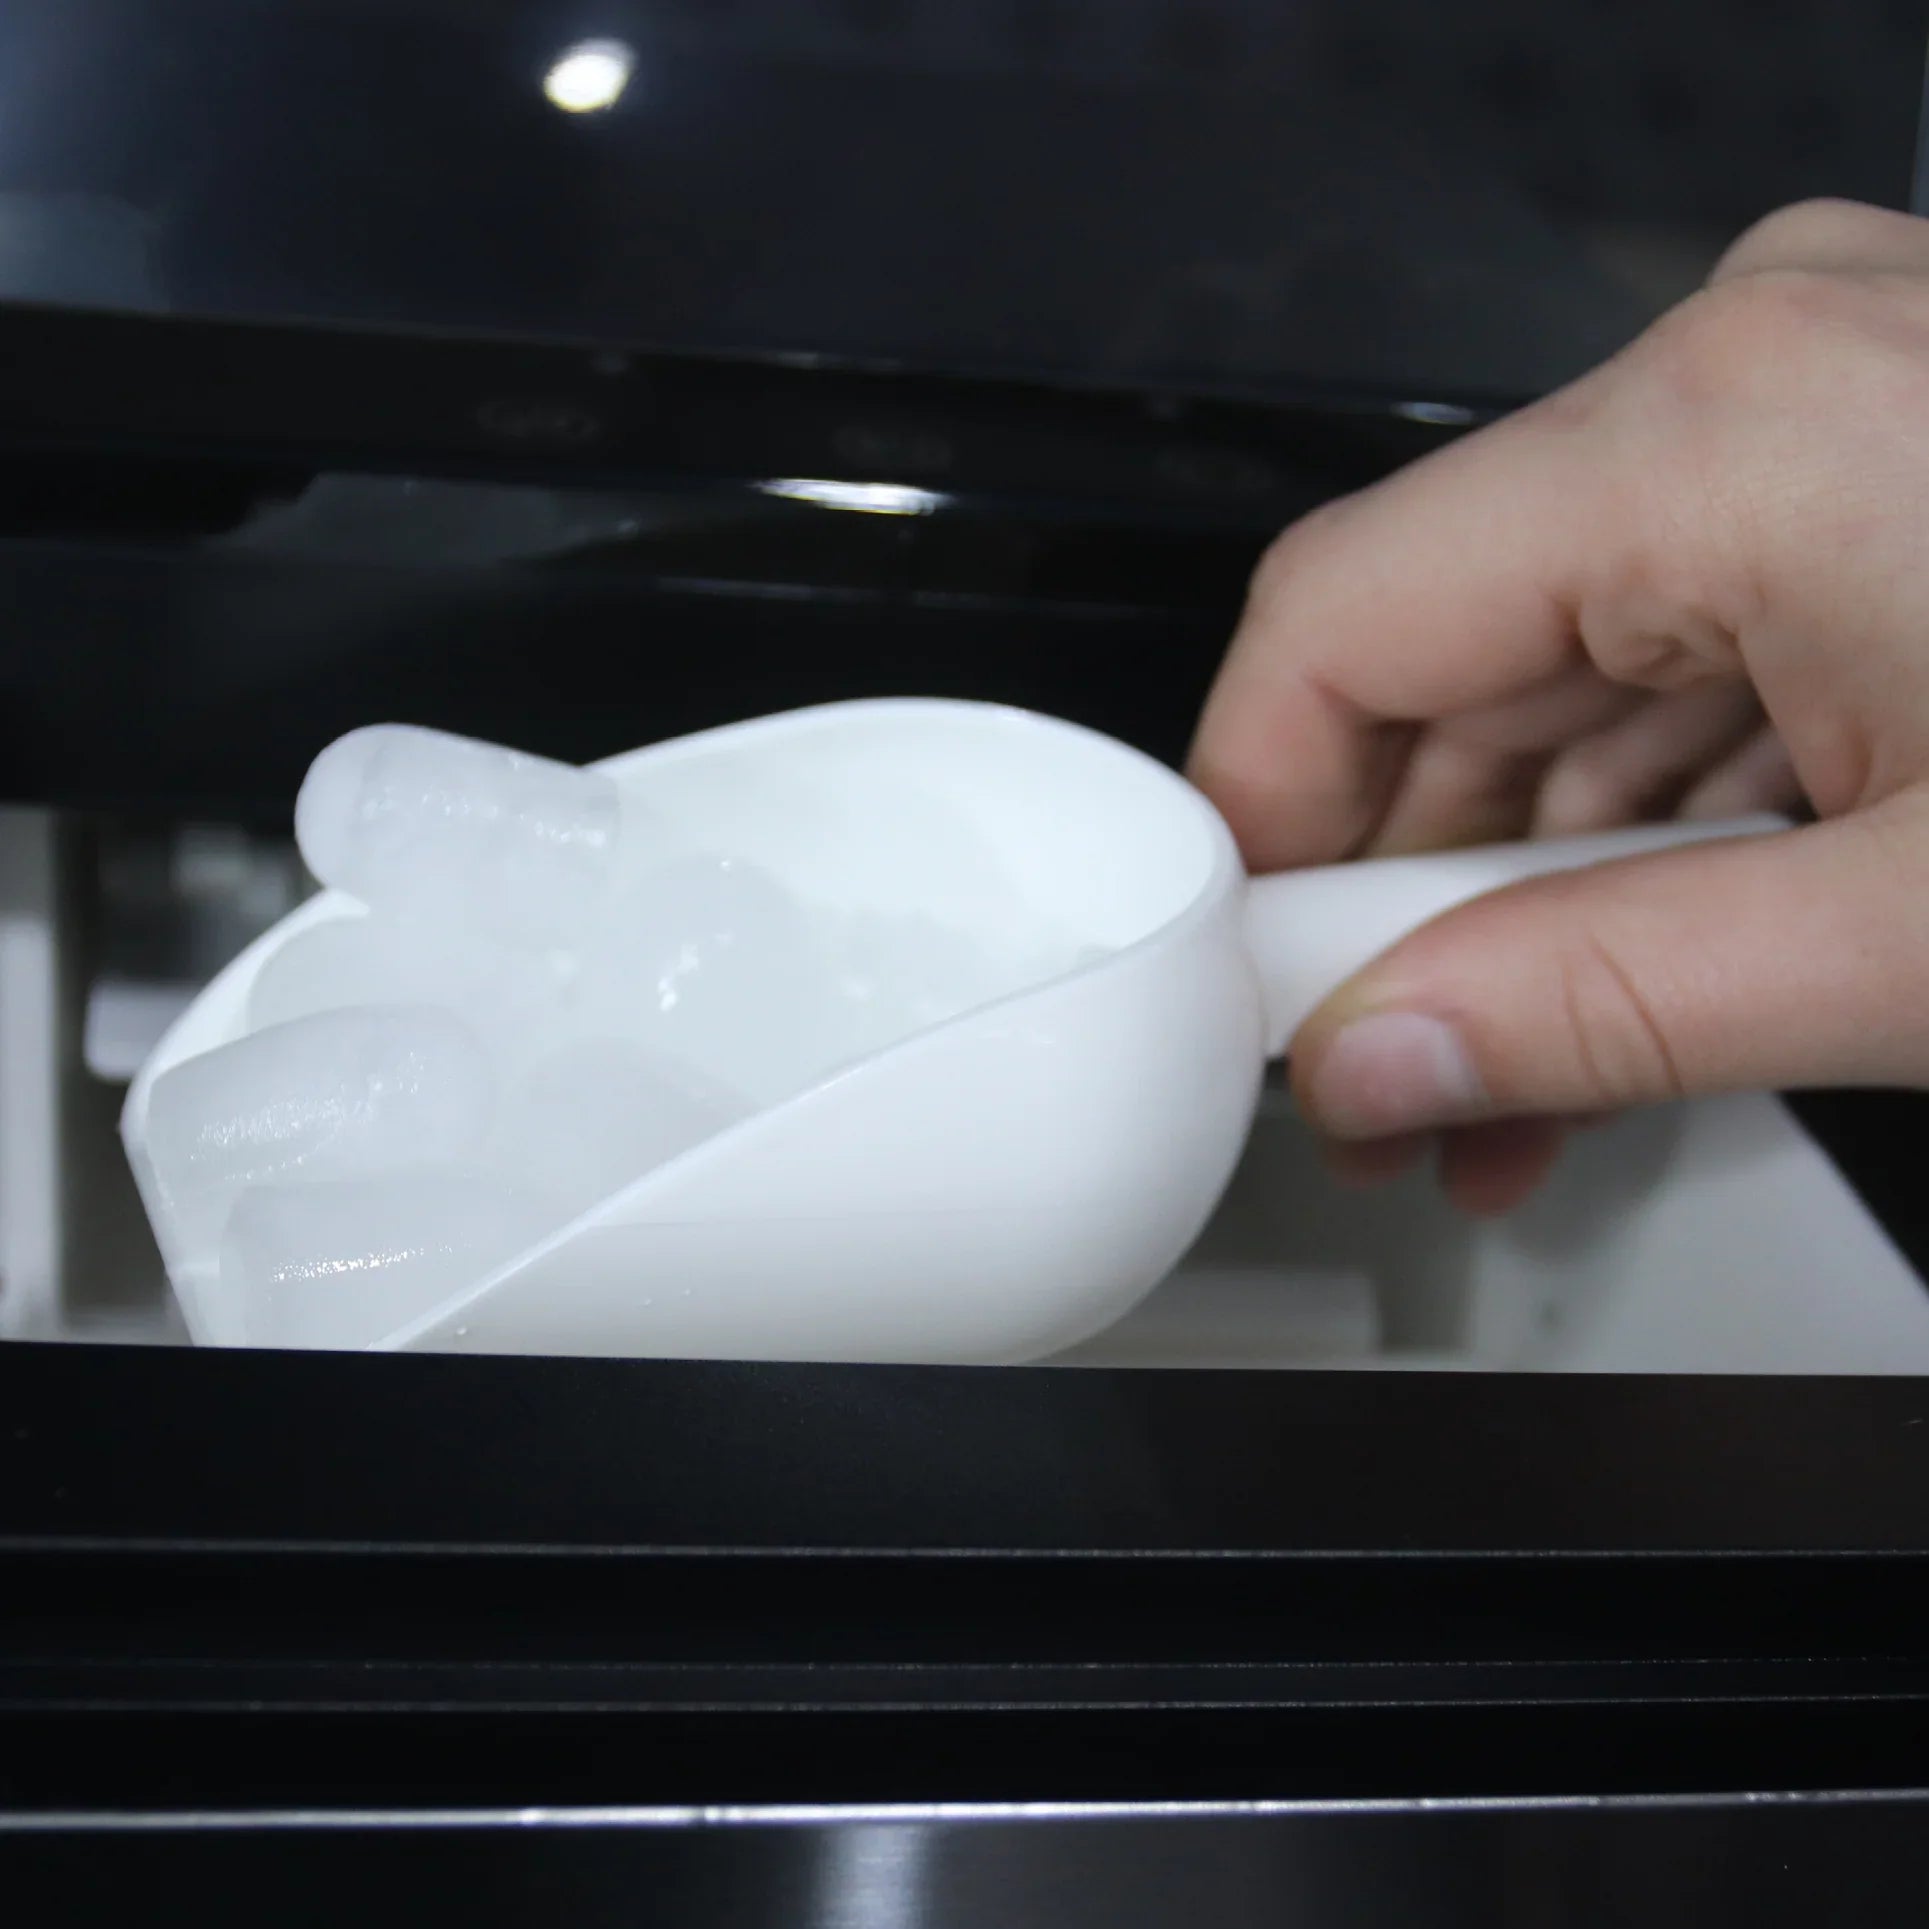 A hand using a clean white scoop to collect ice from a Senelux Compact Ice Maker.